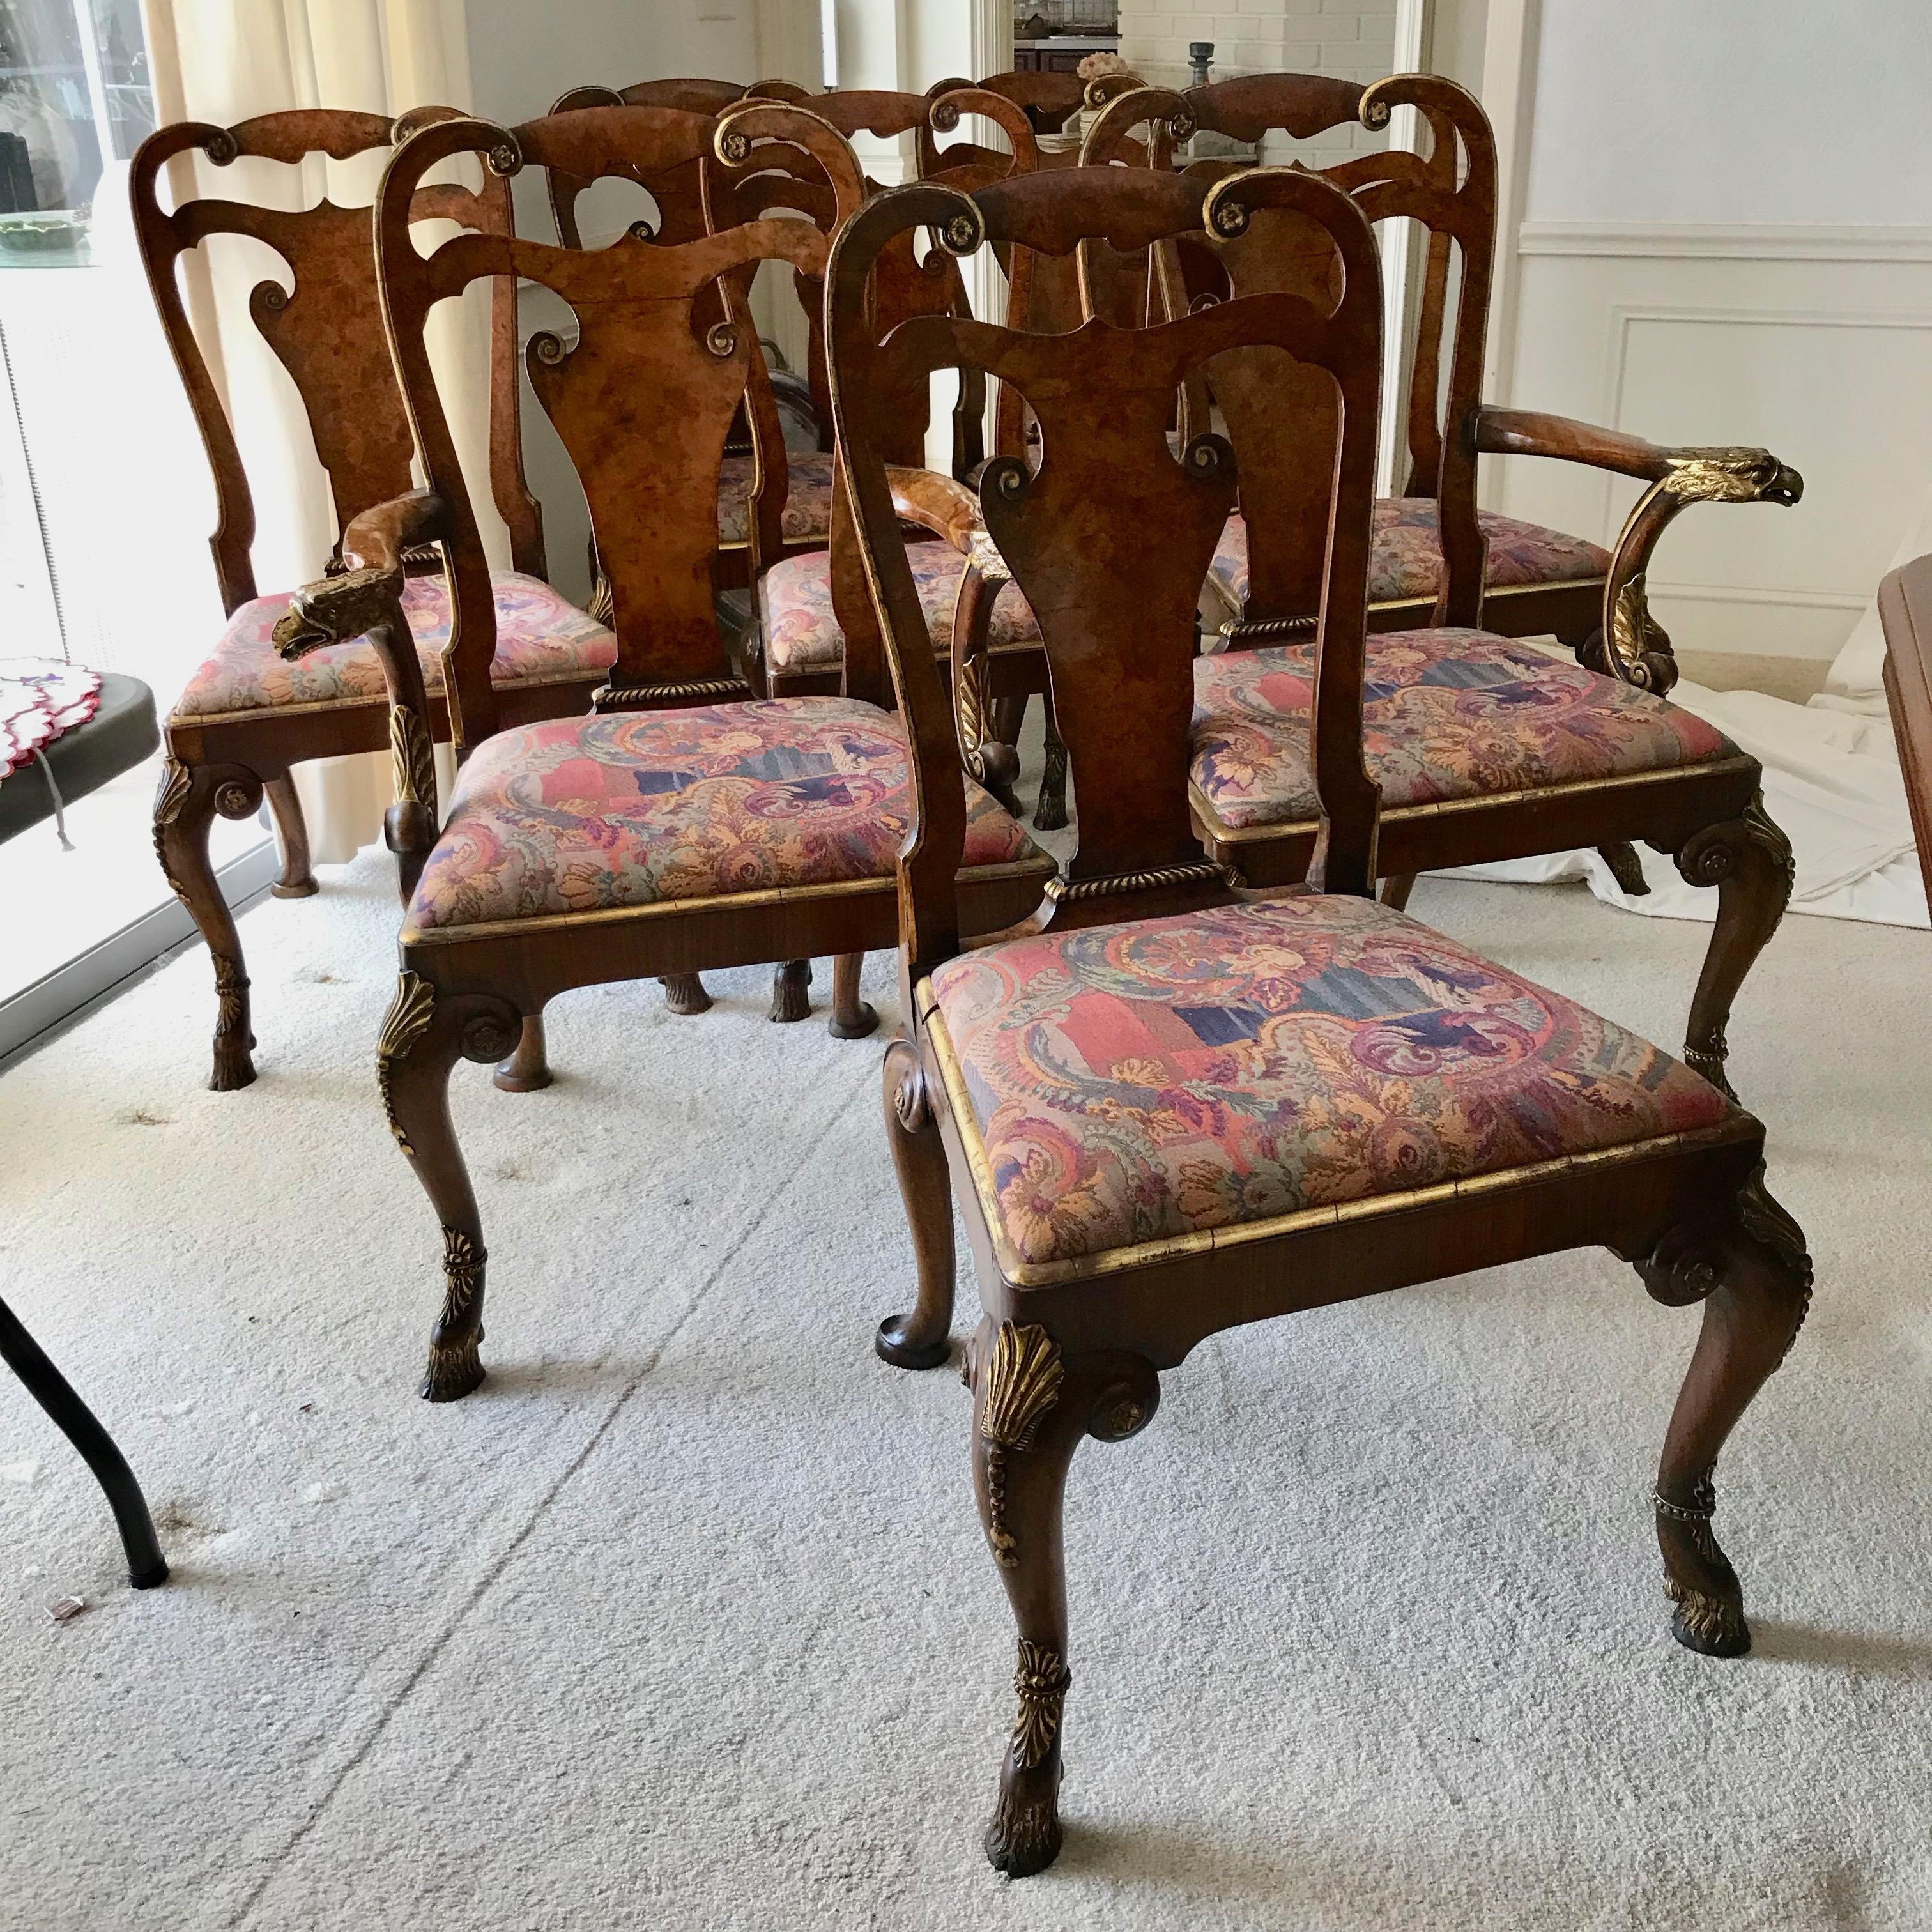 English Set Of 8 19TH Century Queen Anne Style Dining Chairs For Sale